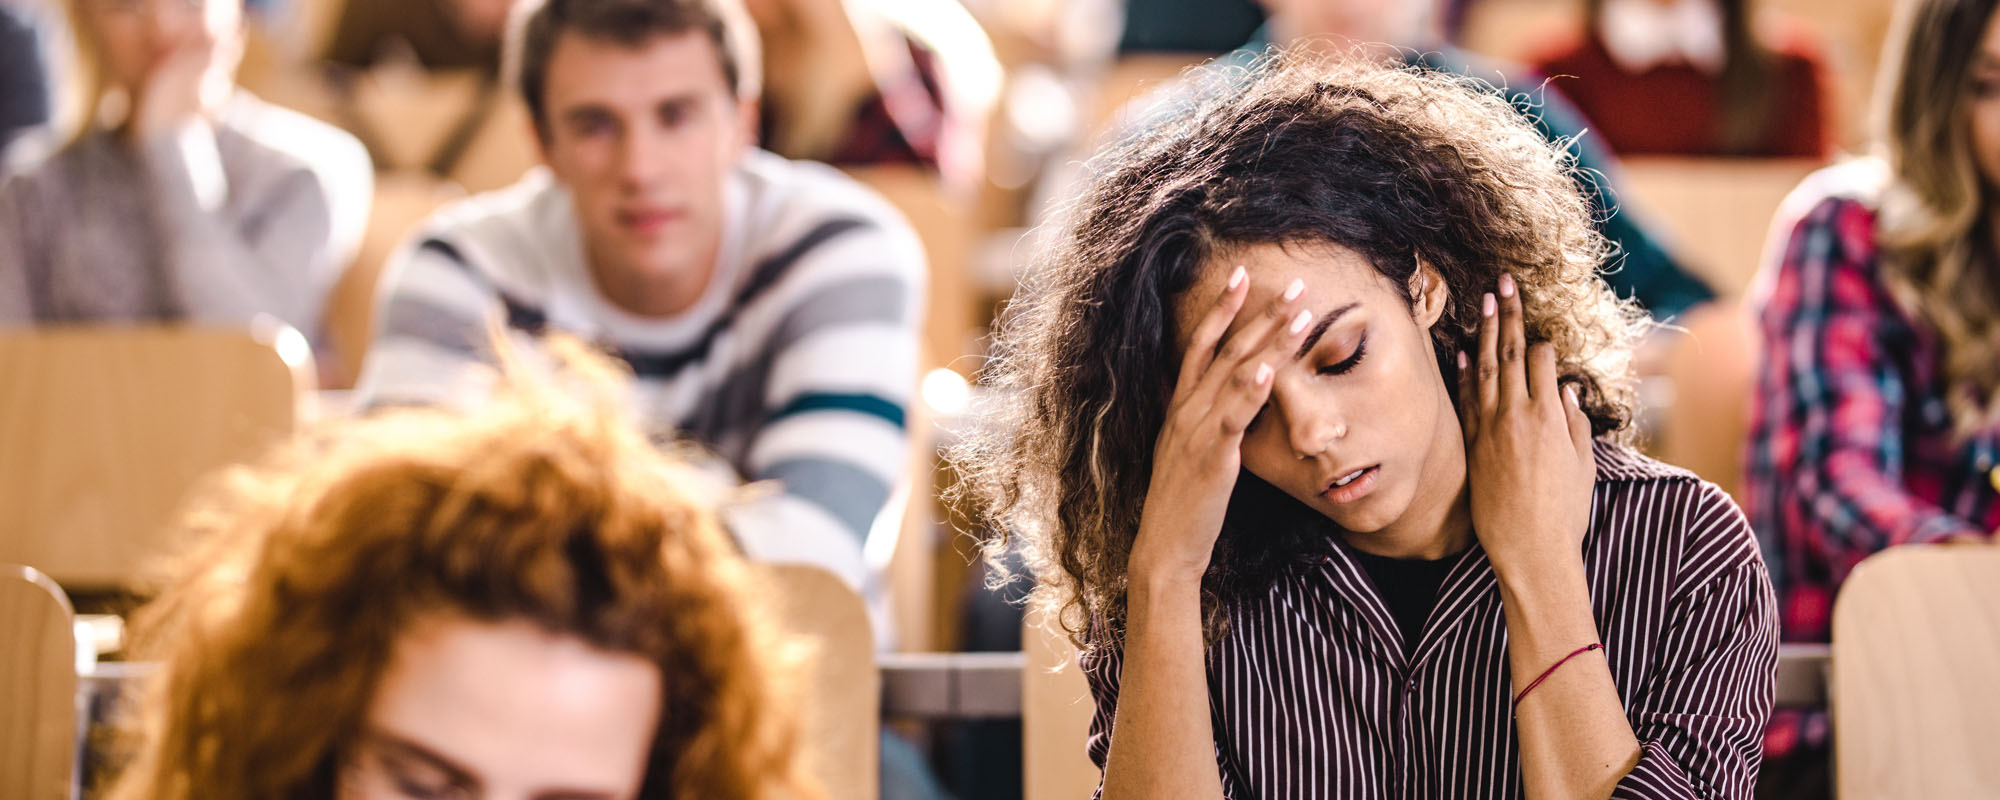 Young adult, college-aged students are sitting in class. Young Black woman is holding her head due to an oncoming migraine headache.